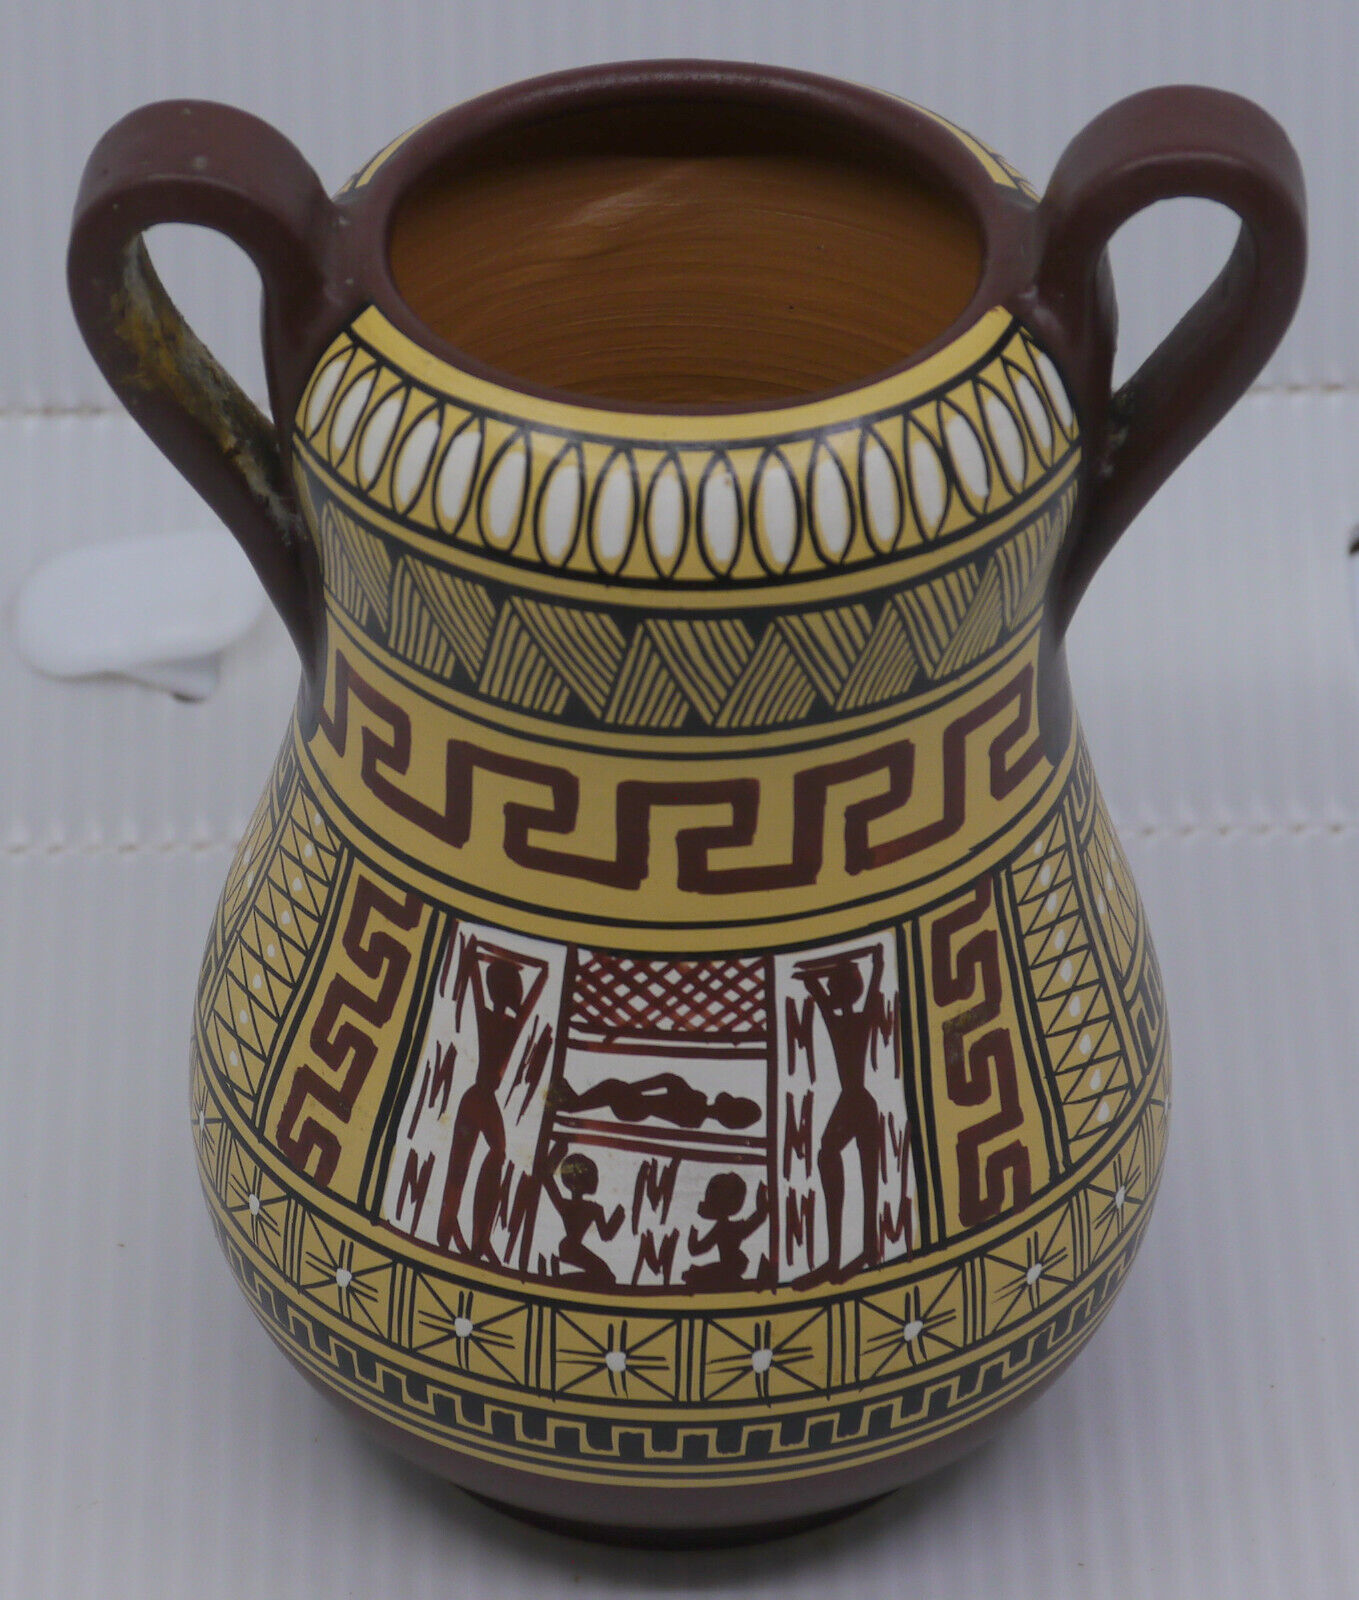 HAND PAINTED GREEK ART POTTERY REPRODUCTION OF ANCIENT ATTIC GEOMETRIC VASE